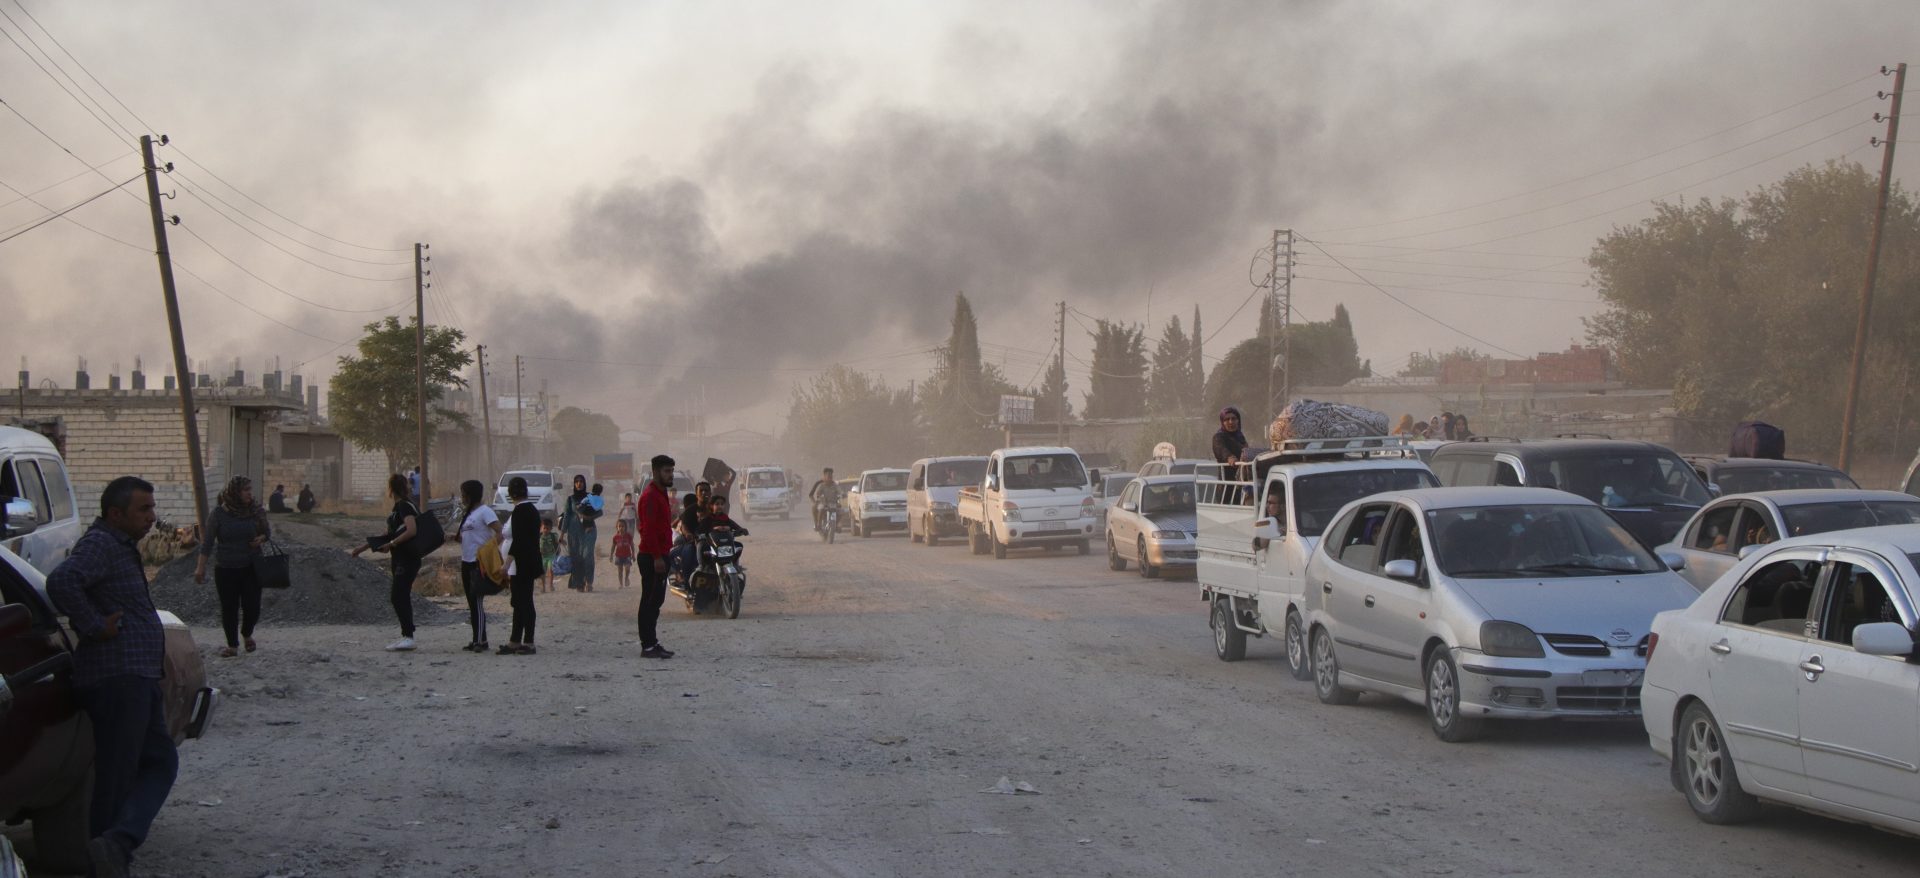 Syrians flee shelling by Turkish forces in Ras al Ayn, northeast Syria, Wednesday, Oct. 9, 2019. Turkish President Recep Tayyip Erdogan announced Wednesday the start of a Turkish military operation against Kurdish fighters in northeastern Syria.